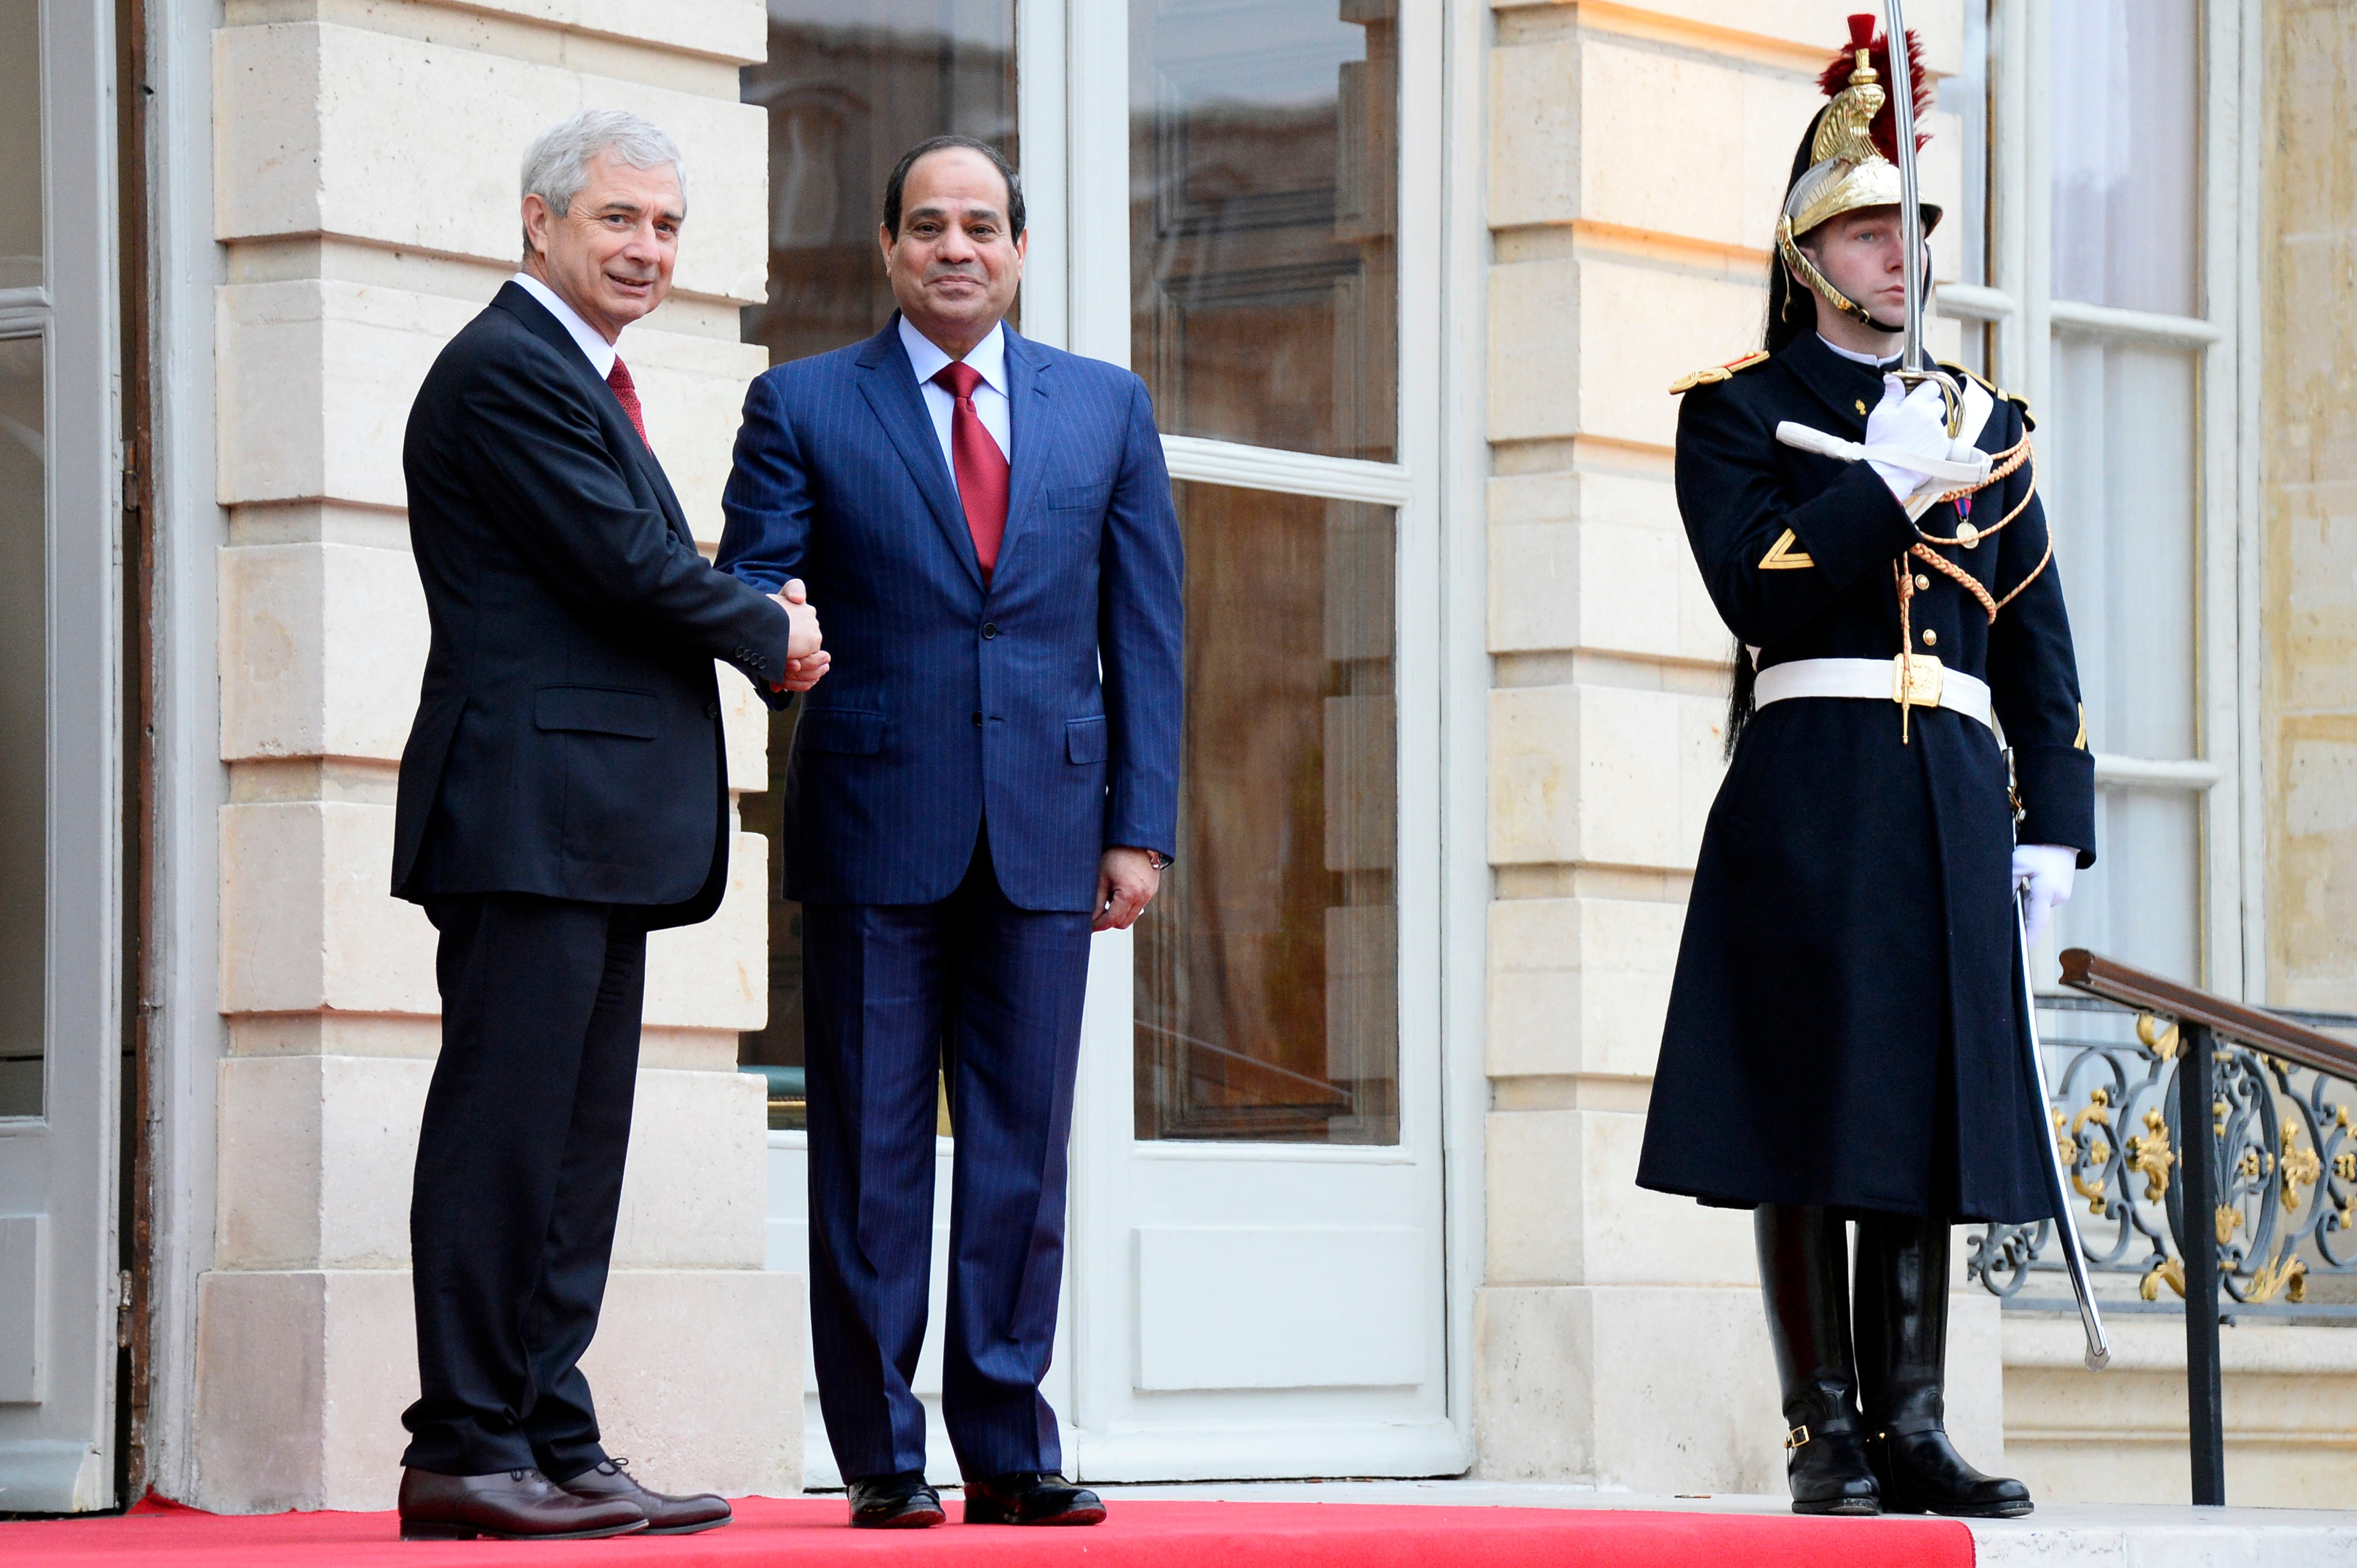 French National Assembly President Claude Bartolone, left, welcomes Egyptian President Abdul Fattah al-Sisi before their talks in Paris on Nov. 27, 2014 (Bertrand Guay—AP)